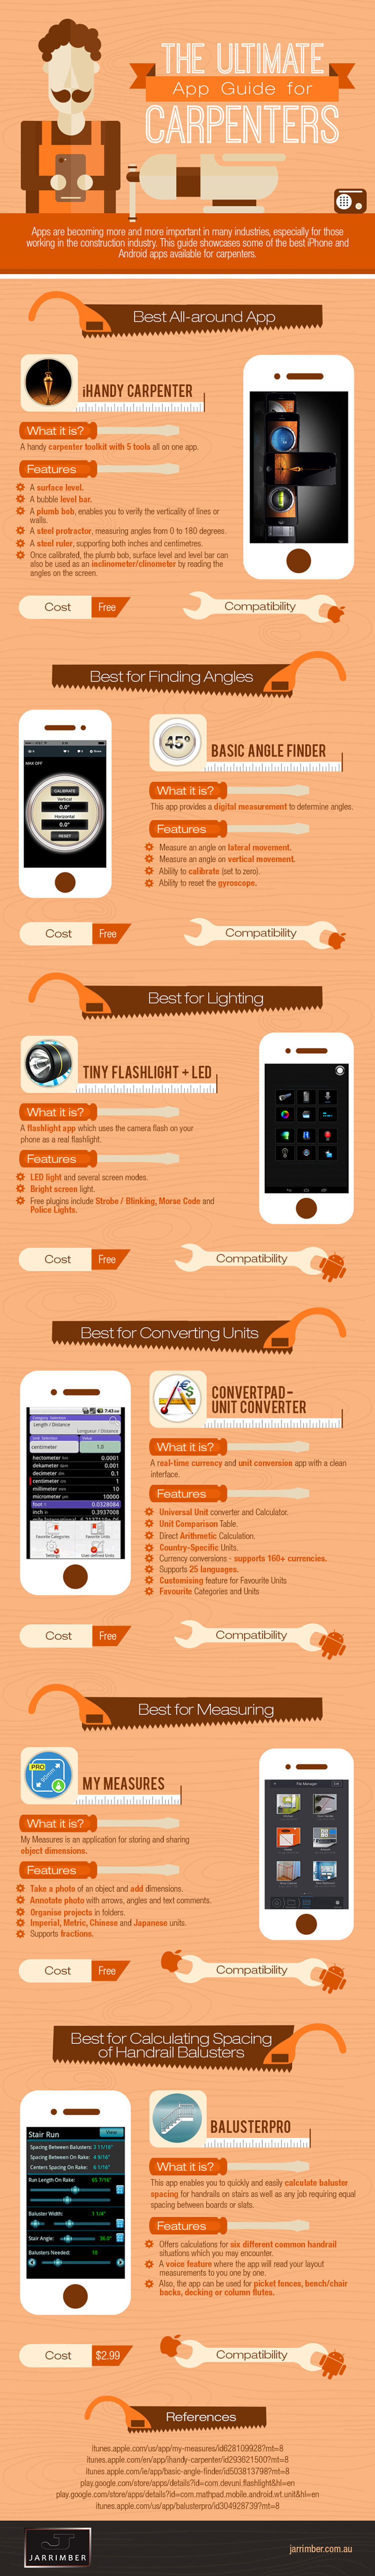 The Ultimate App Guide for Carpenters Infographic